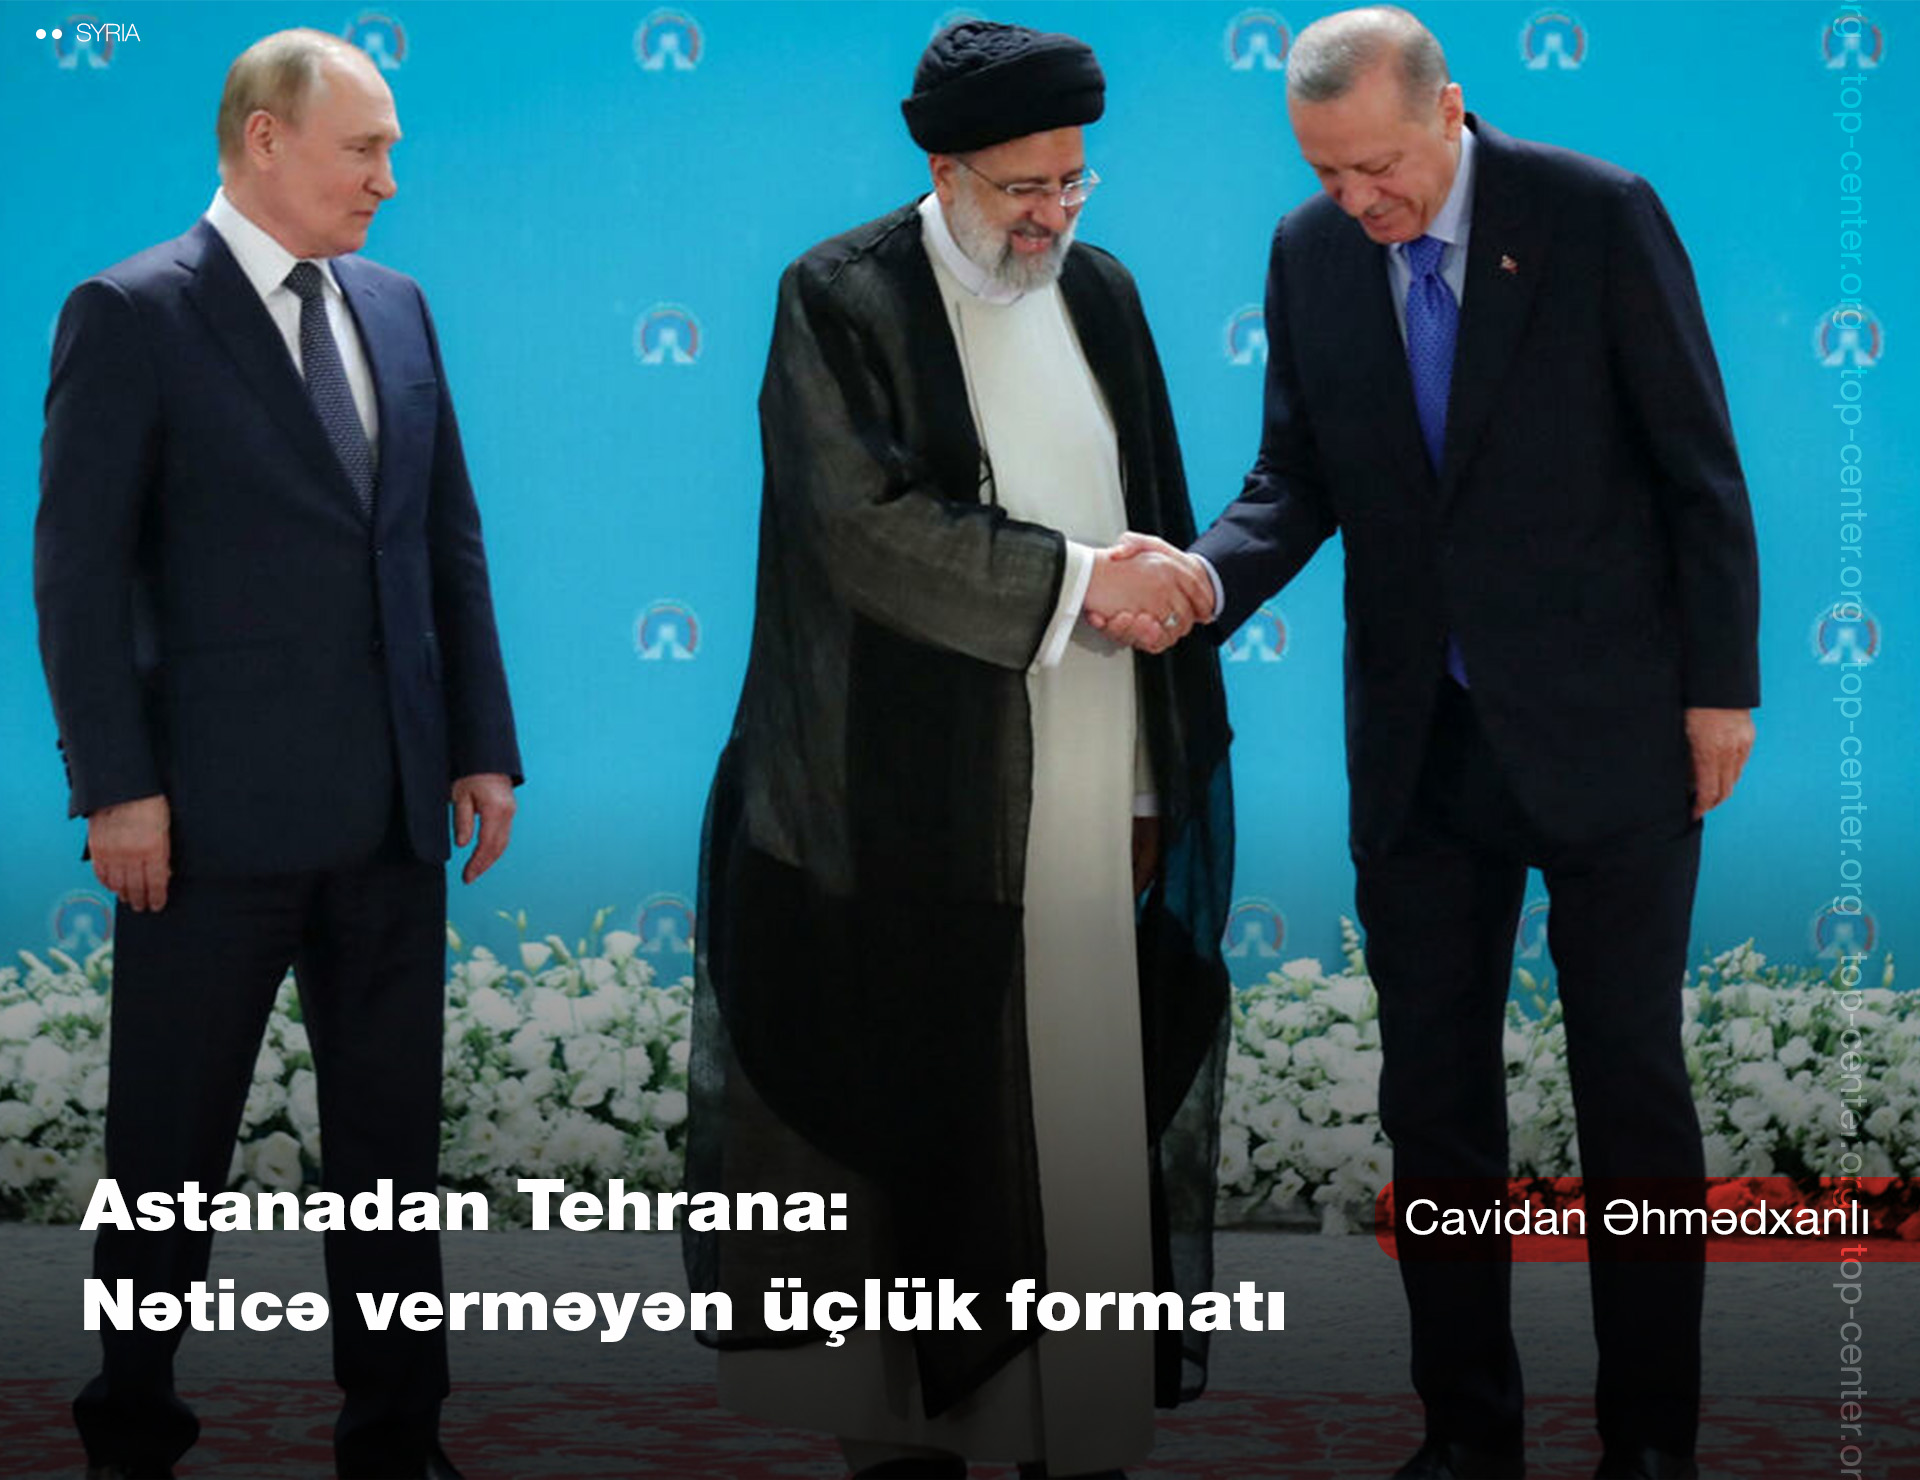 From Astana to Tehran: Resultless trilateral format